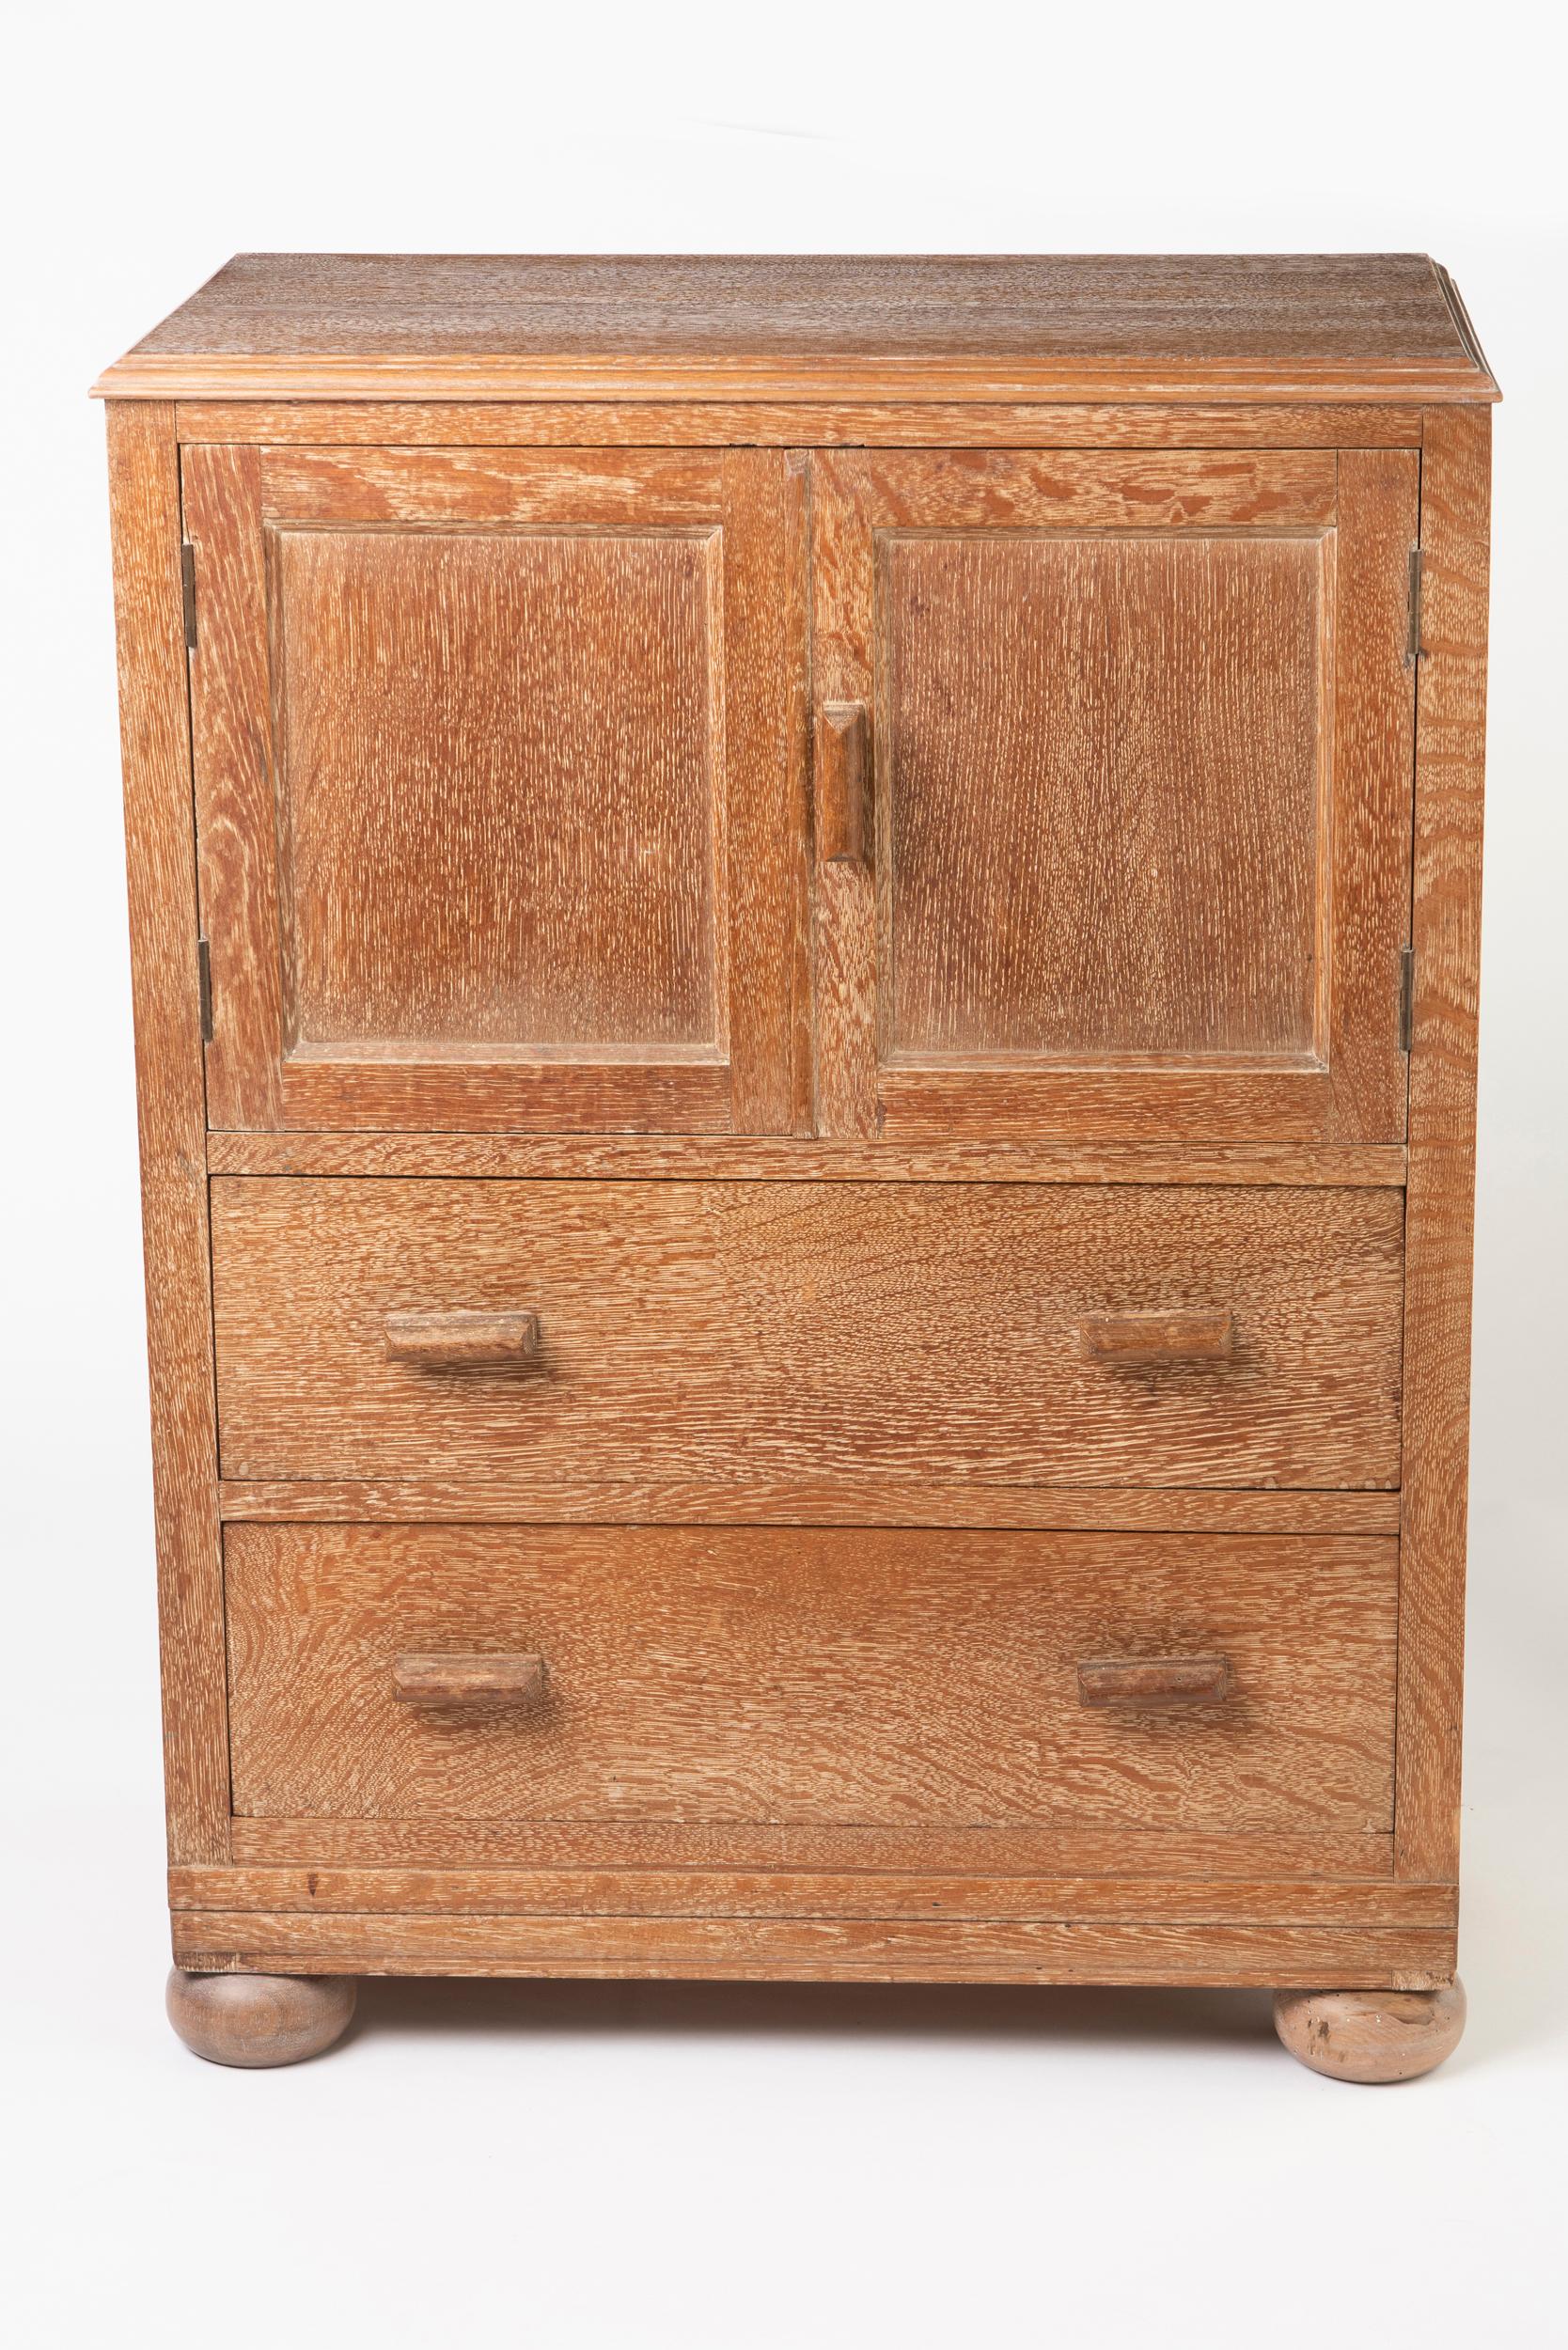 A cabinet by Heals of London.
Limed oak.
Of rectangular form.
Double cupboard above two drawers. Bun feet.
England, circa 1920
Measures: 92 cm high x 69 cm wide x 41 cm deep.